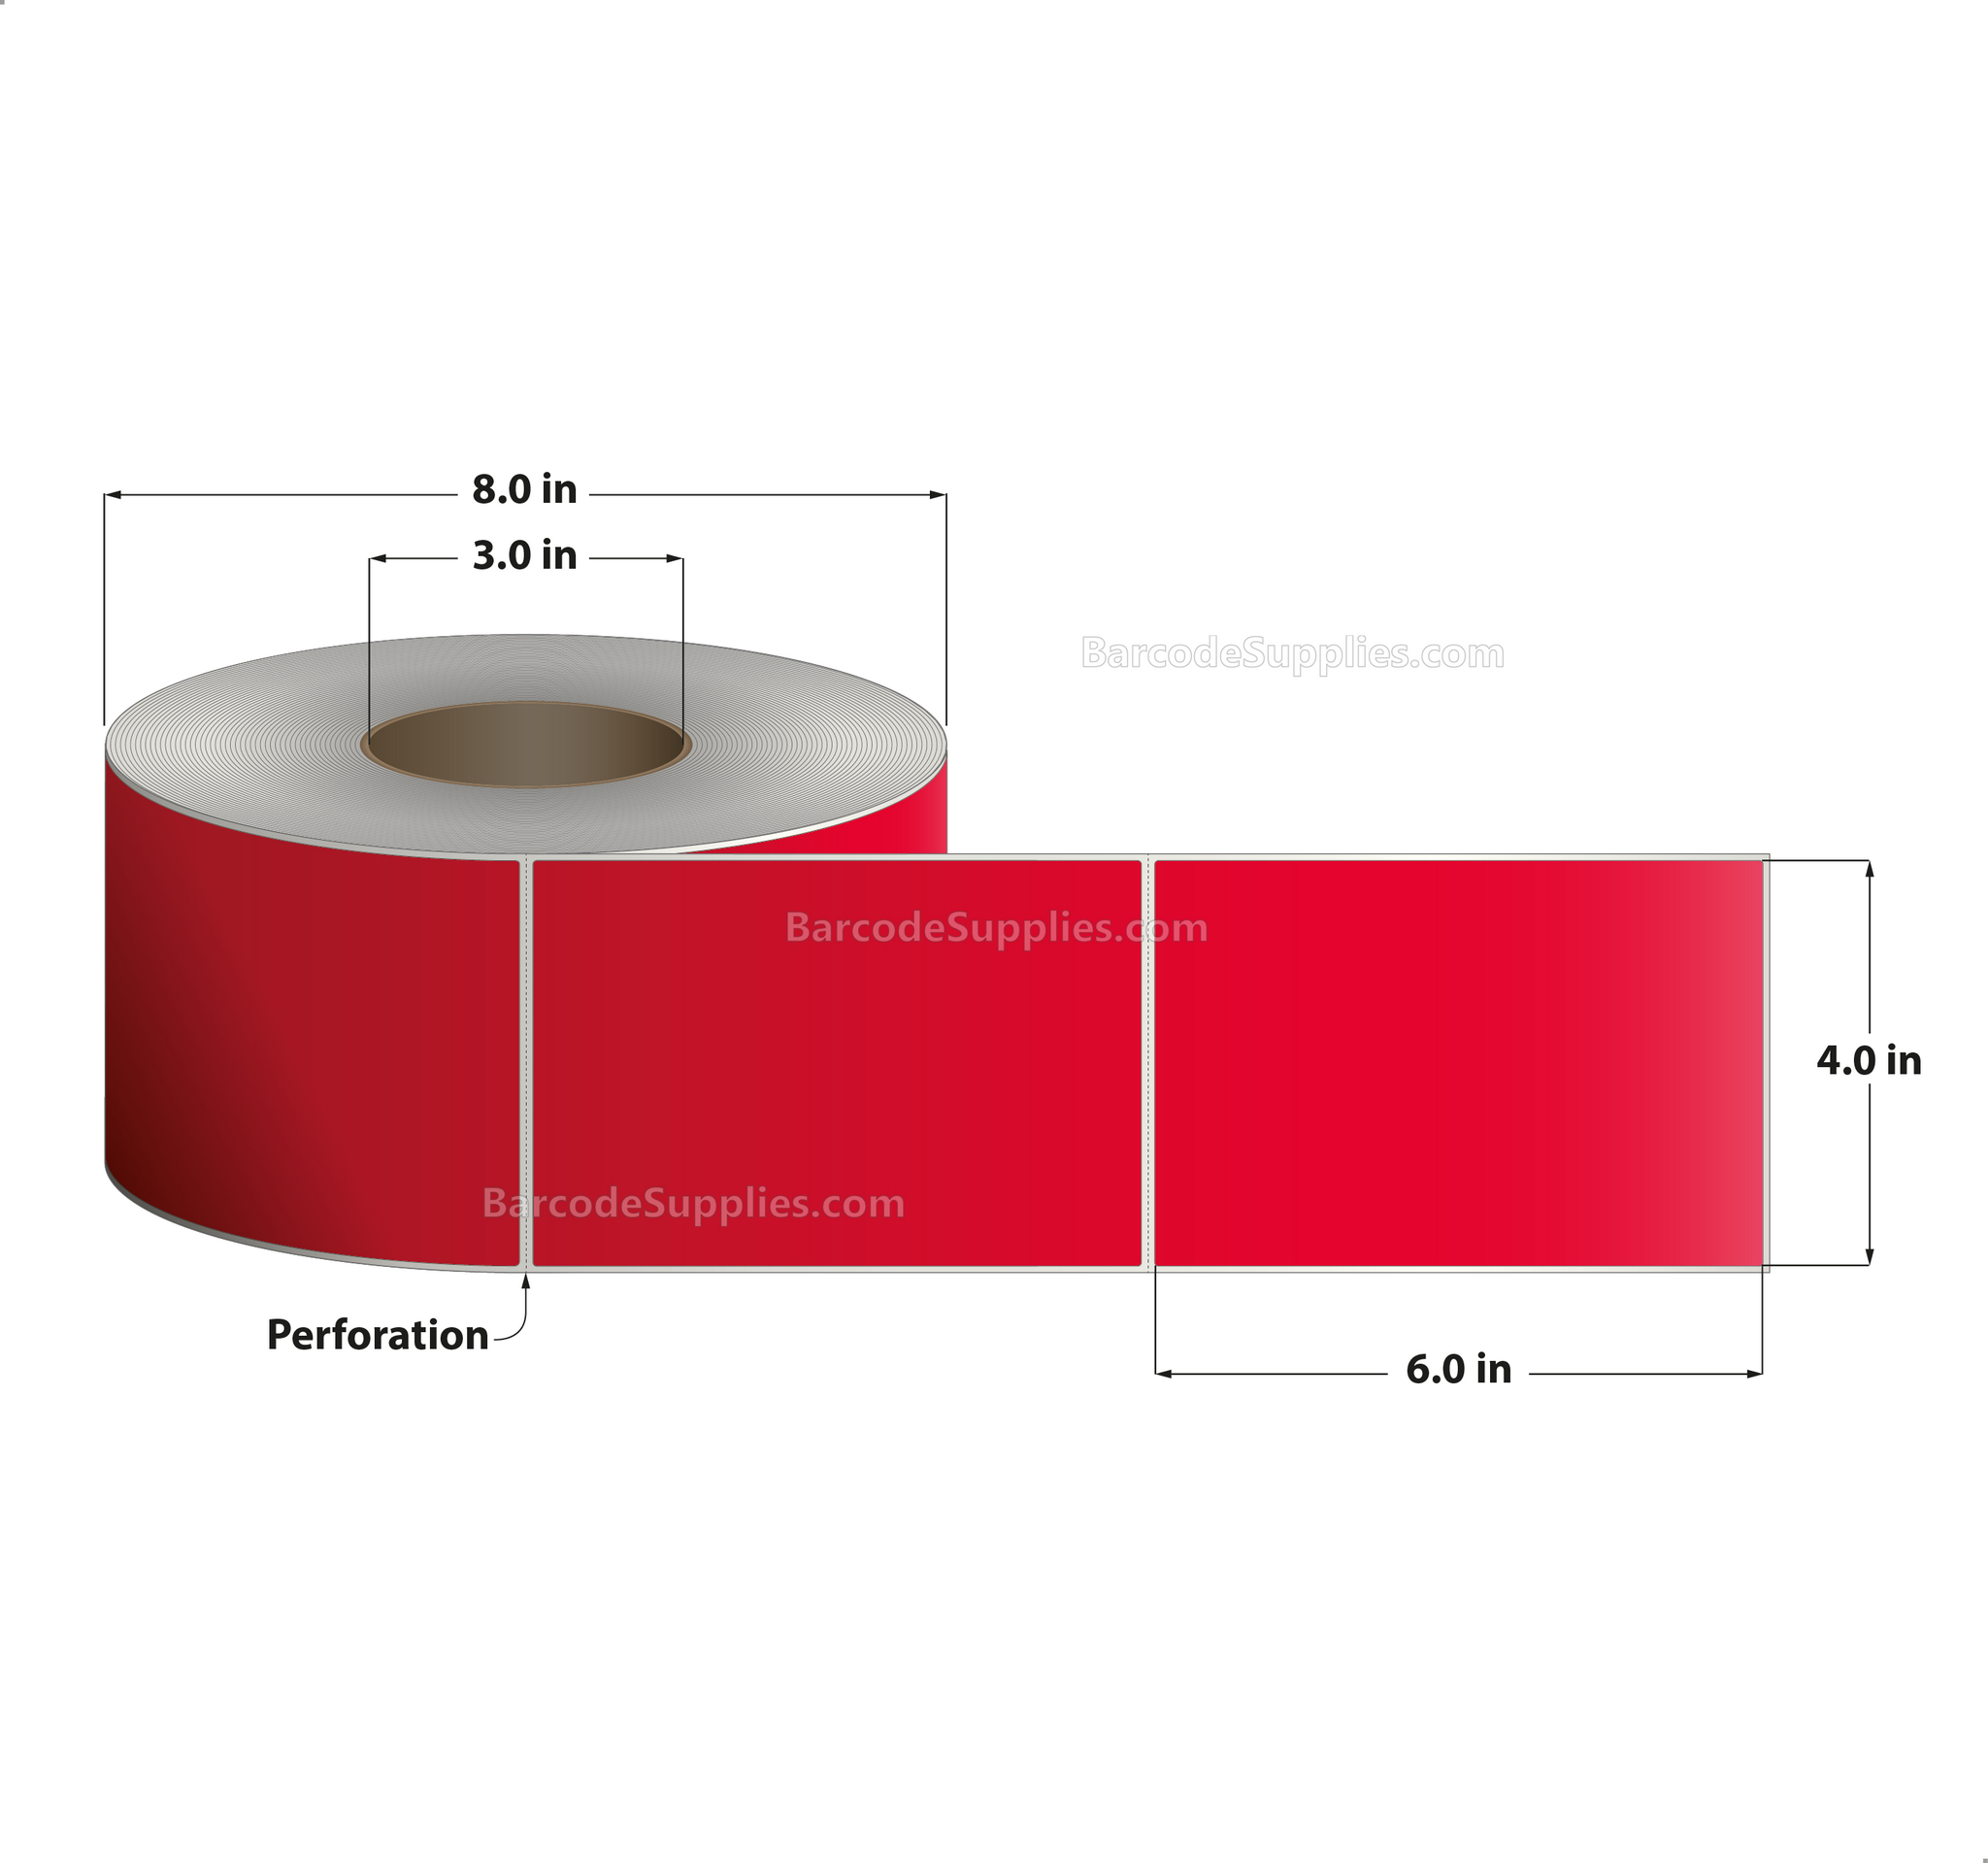 4 x 6 Direct Thermal Red Labels With Acrylic Adhesive - Perforated - 1000 Labels Per Roll - Carton Of 4 Rolls - 4000 Labels Total - MPN: RD-4-6-1000-RD